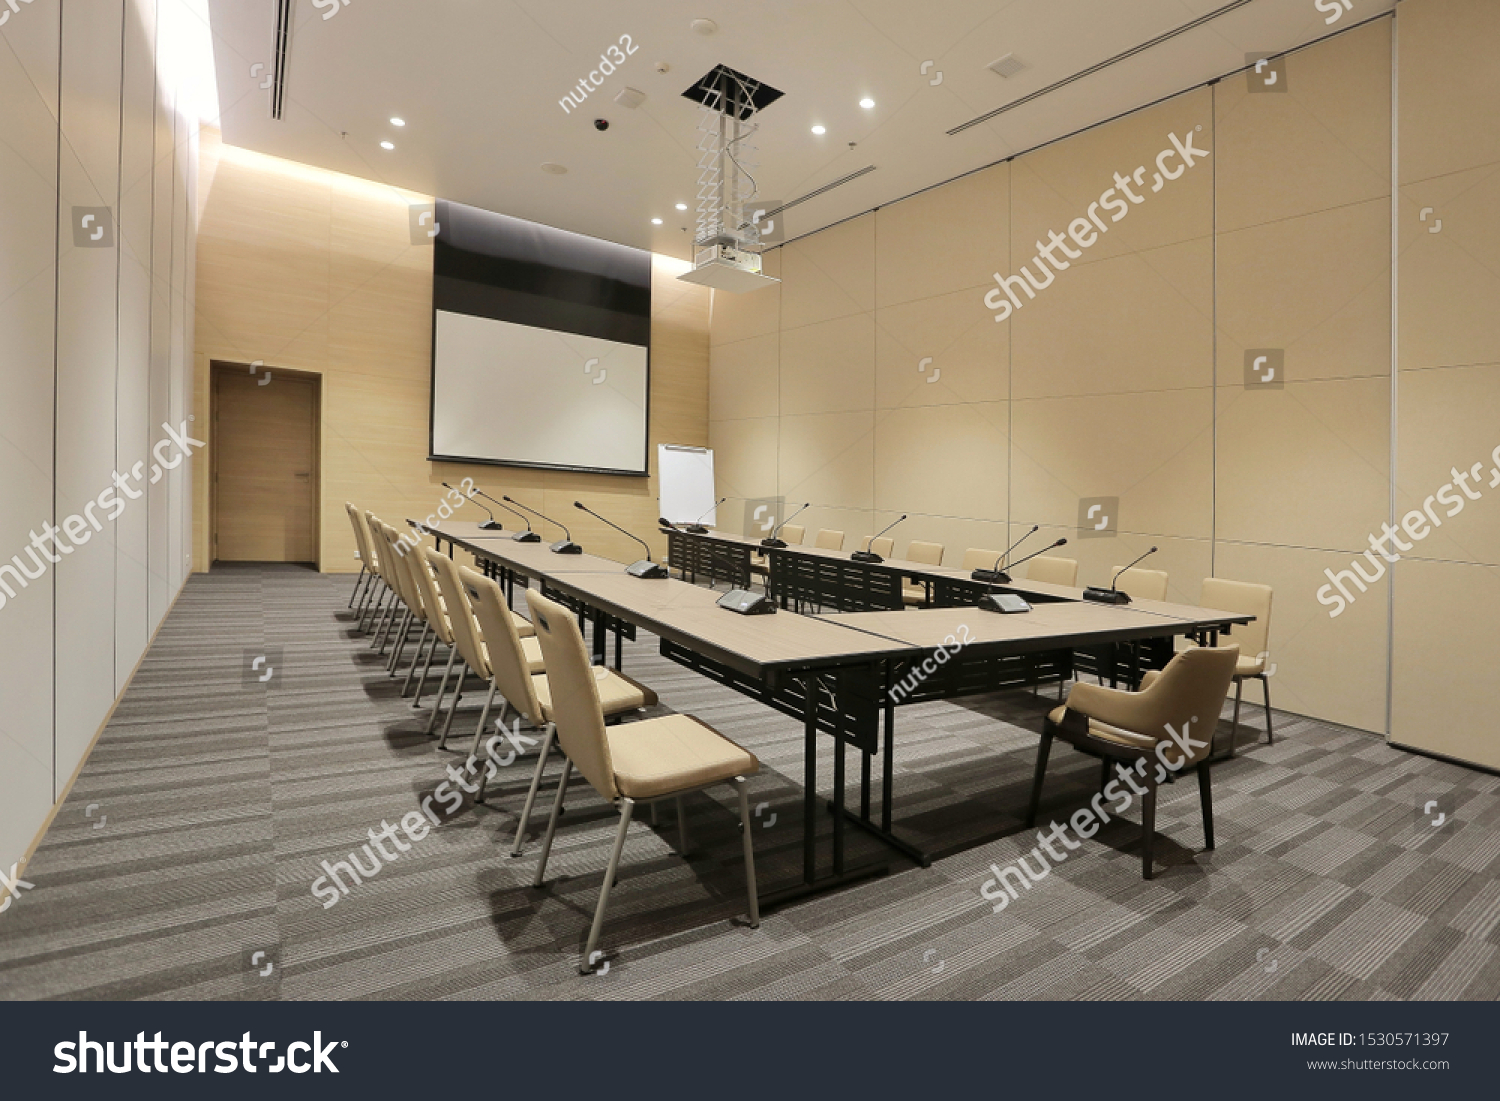 Interior of modern fully equipped professional facilities meeting conference room boardroom classroom office with nobody empty and  microphones white projector board chairs door business meeting venue #1530571397